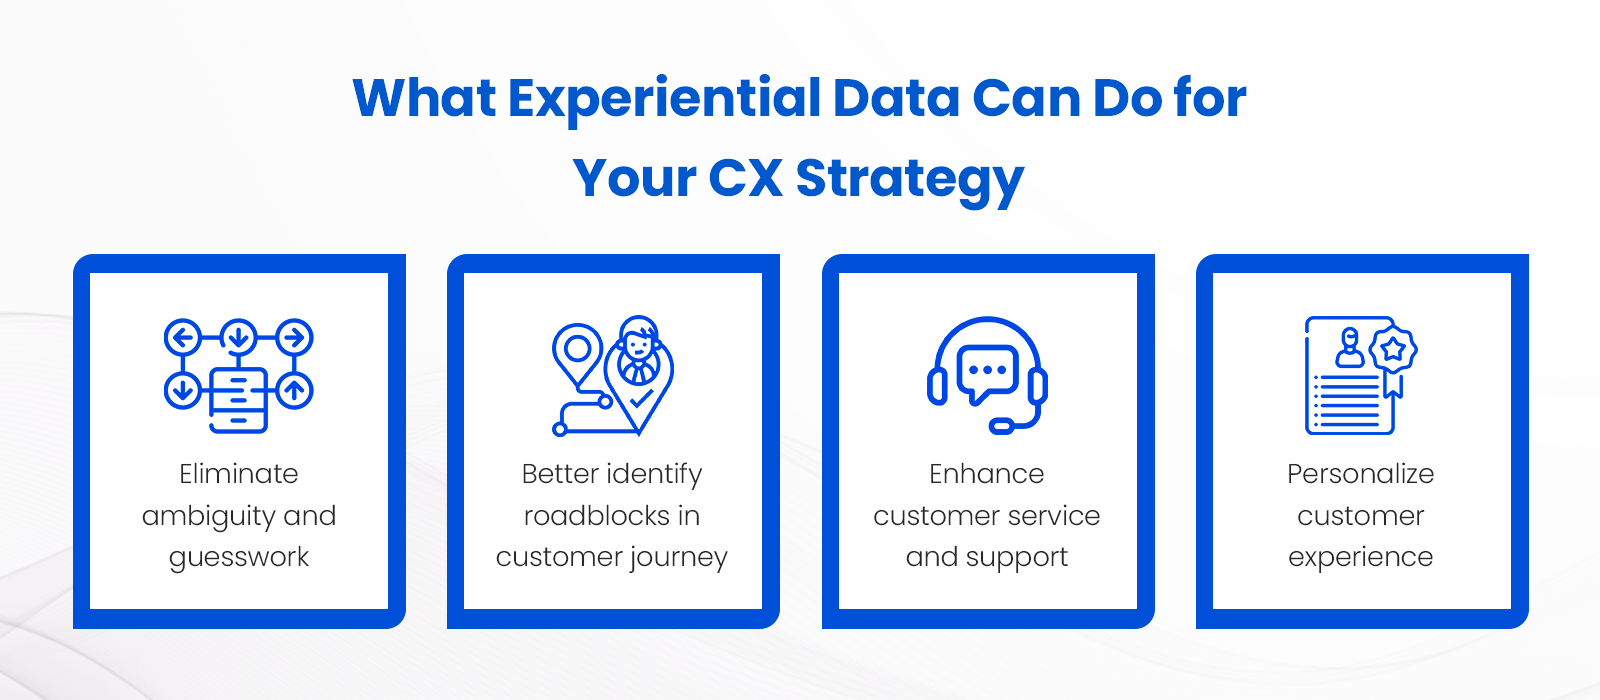 What Experiential Data Can Do for Your CX Strategy